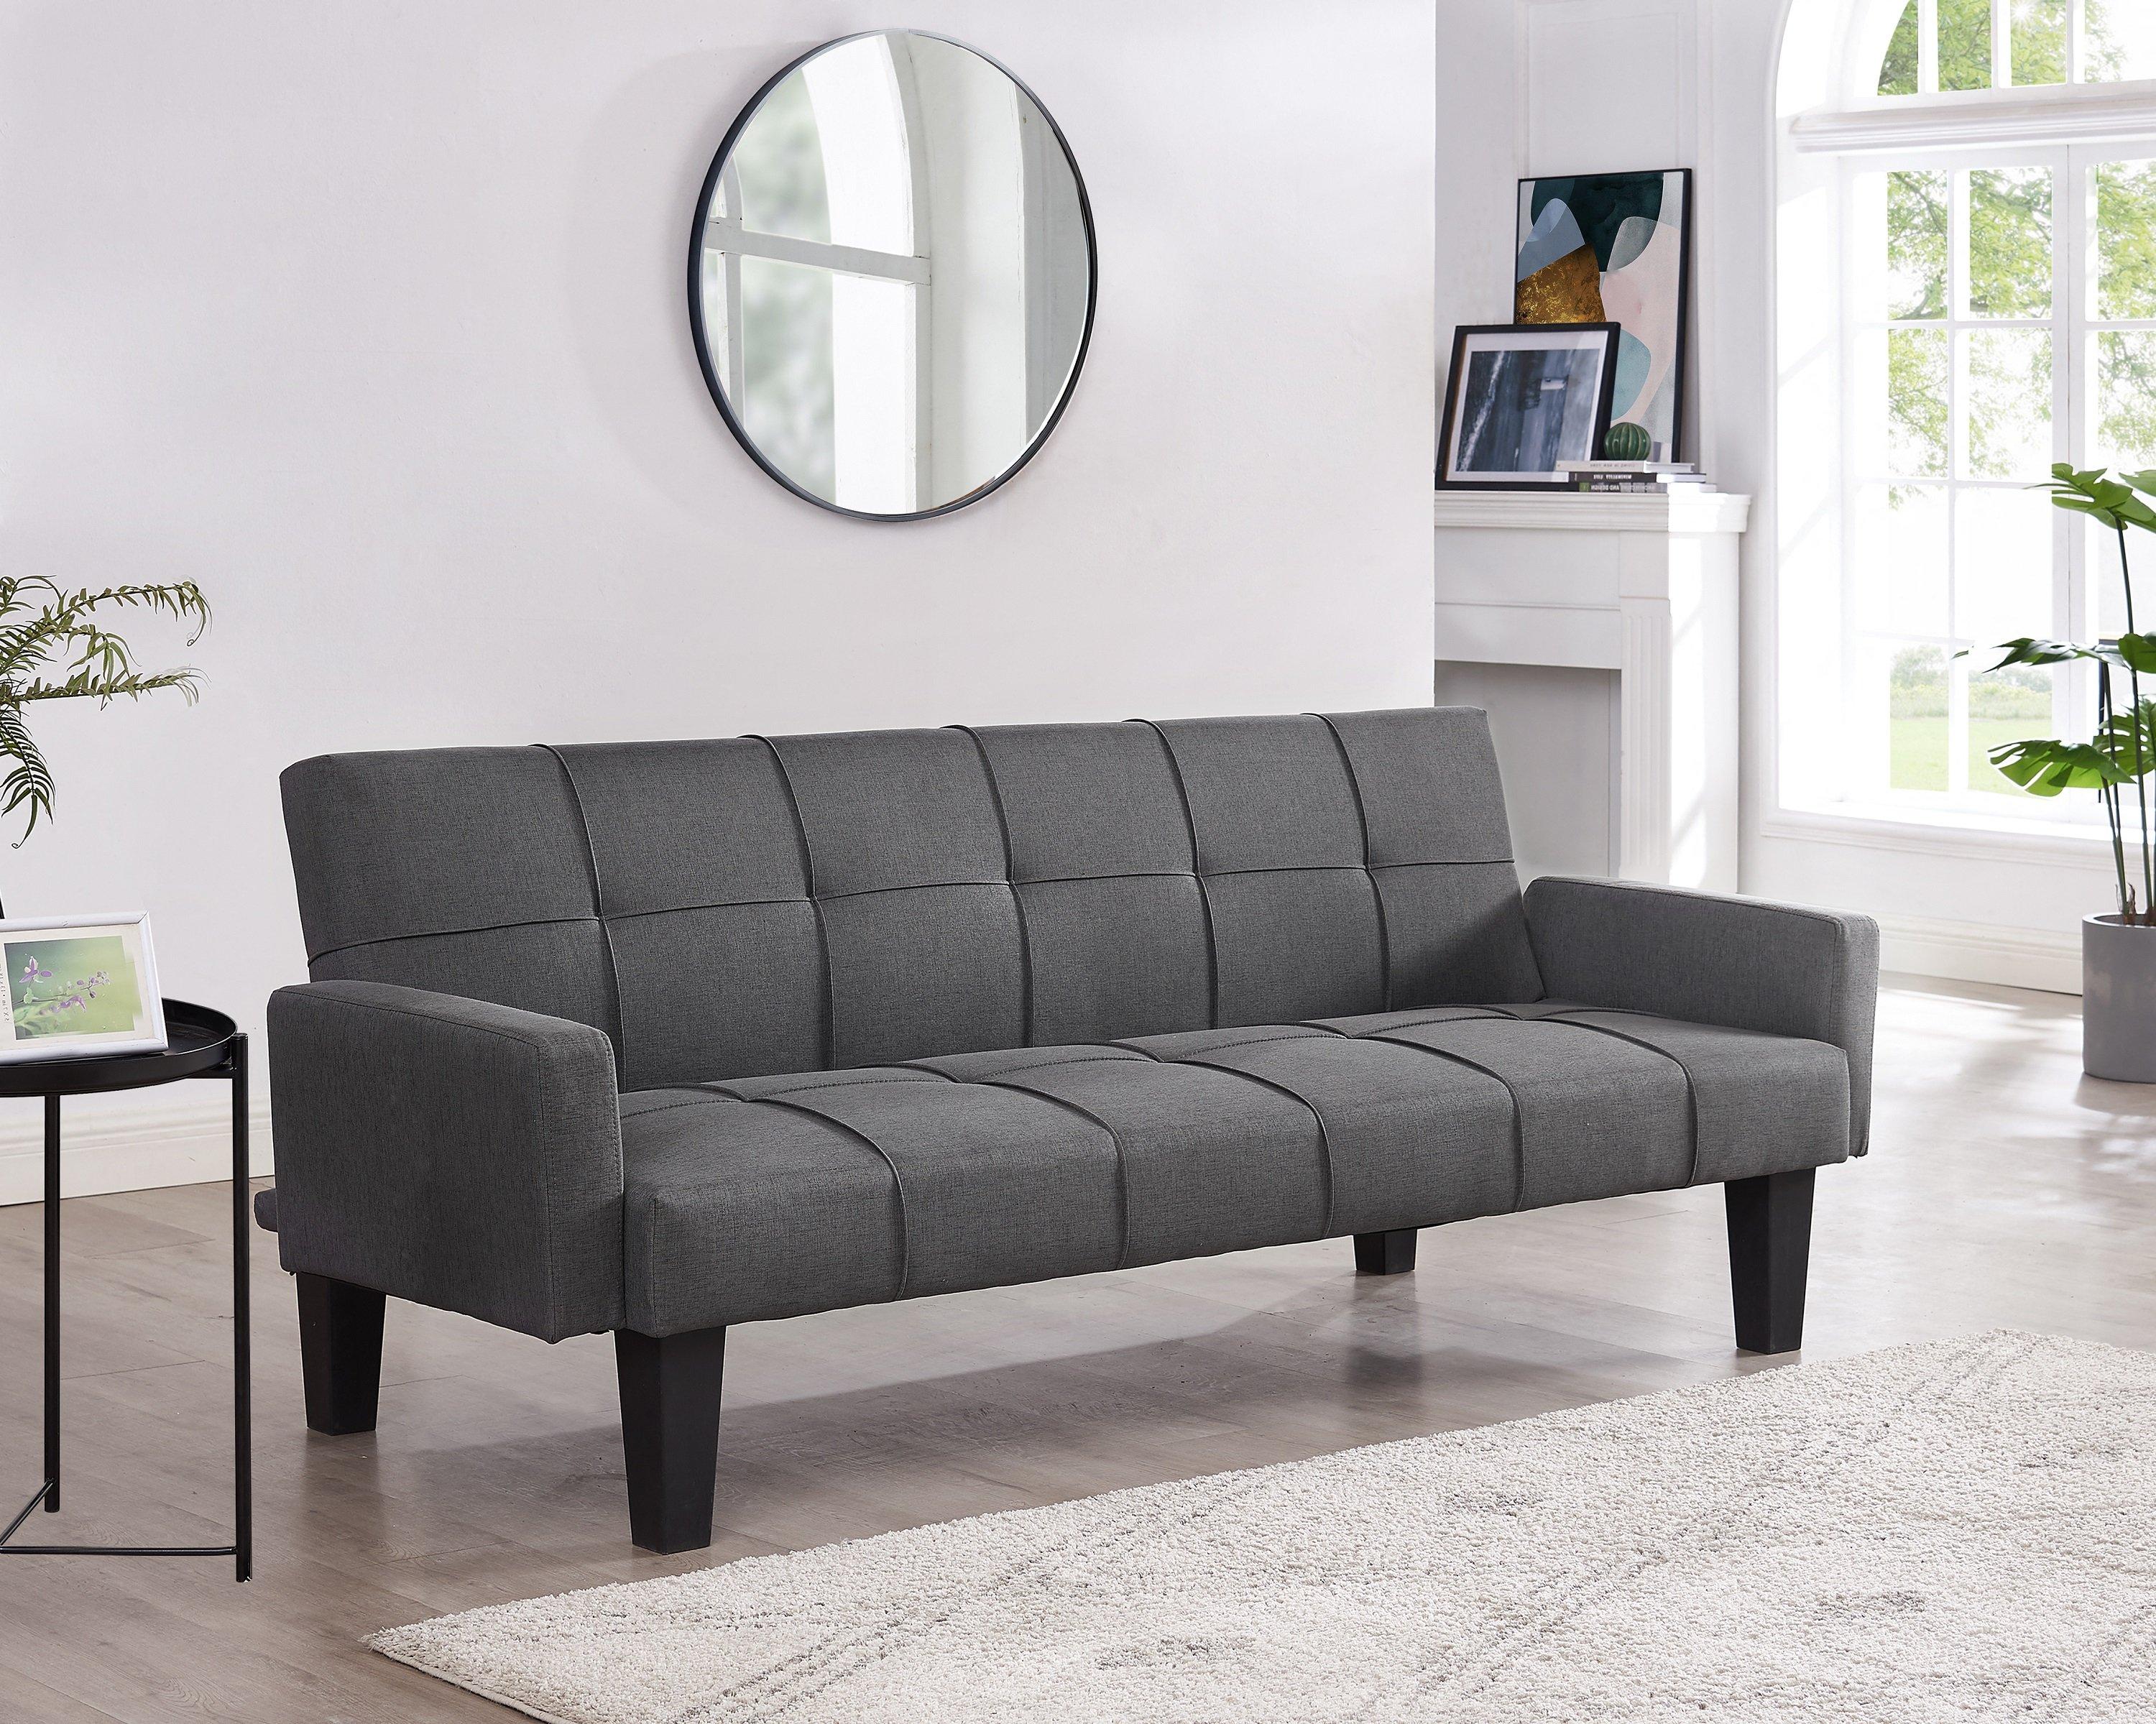 Levine Fabric Sofa Bed With Tufted Detail Square Armrests and Black Wooden Legs